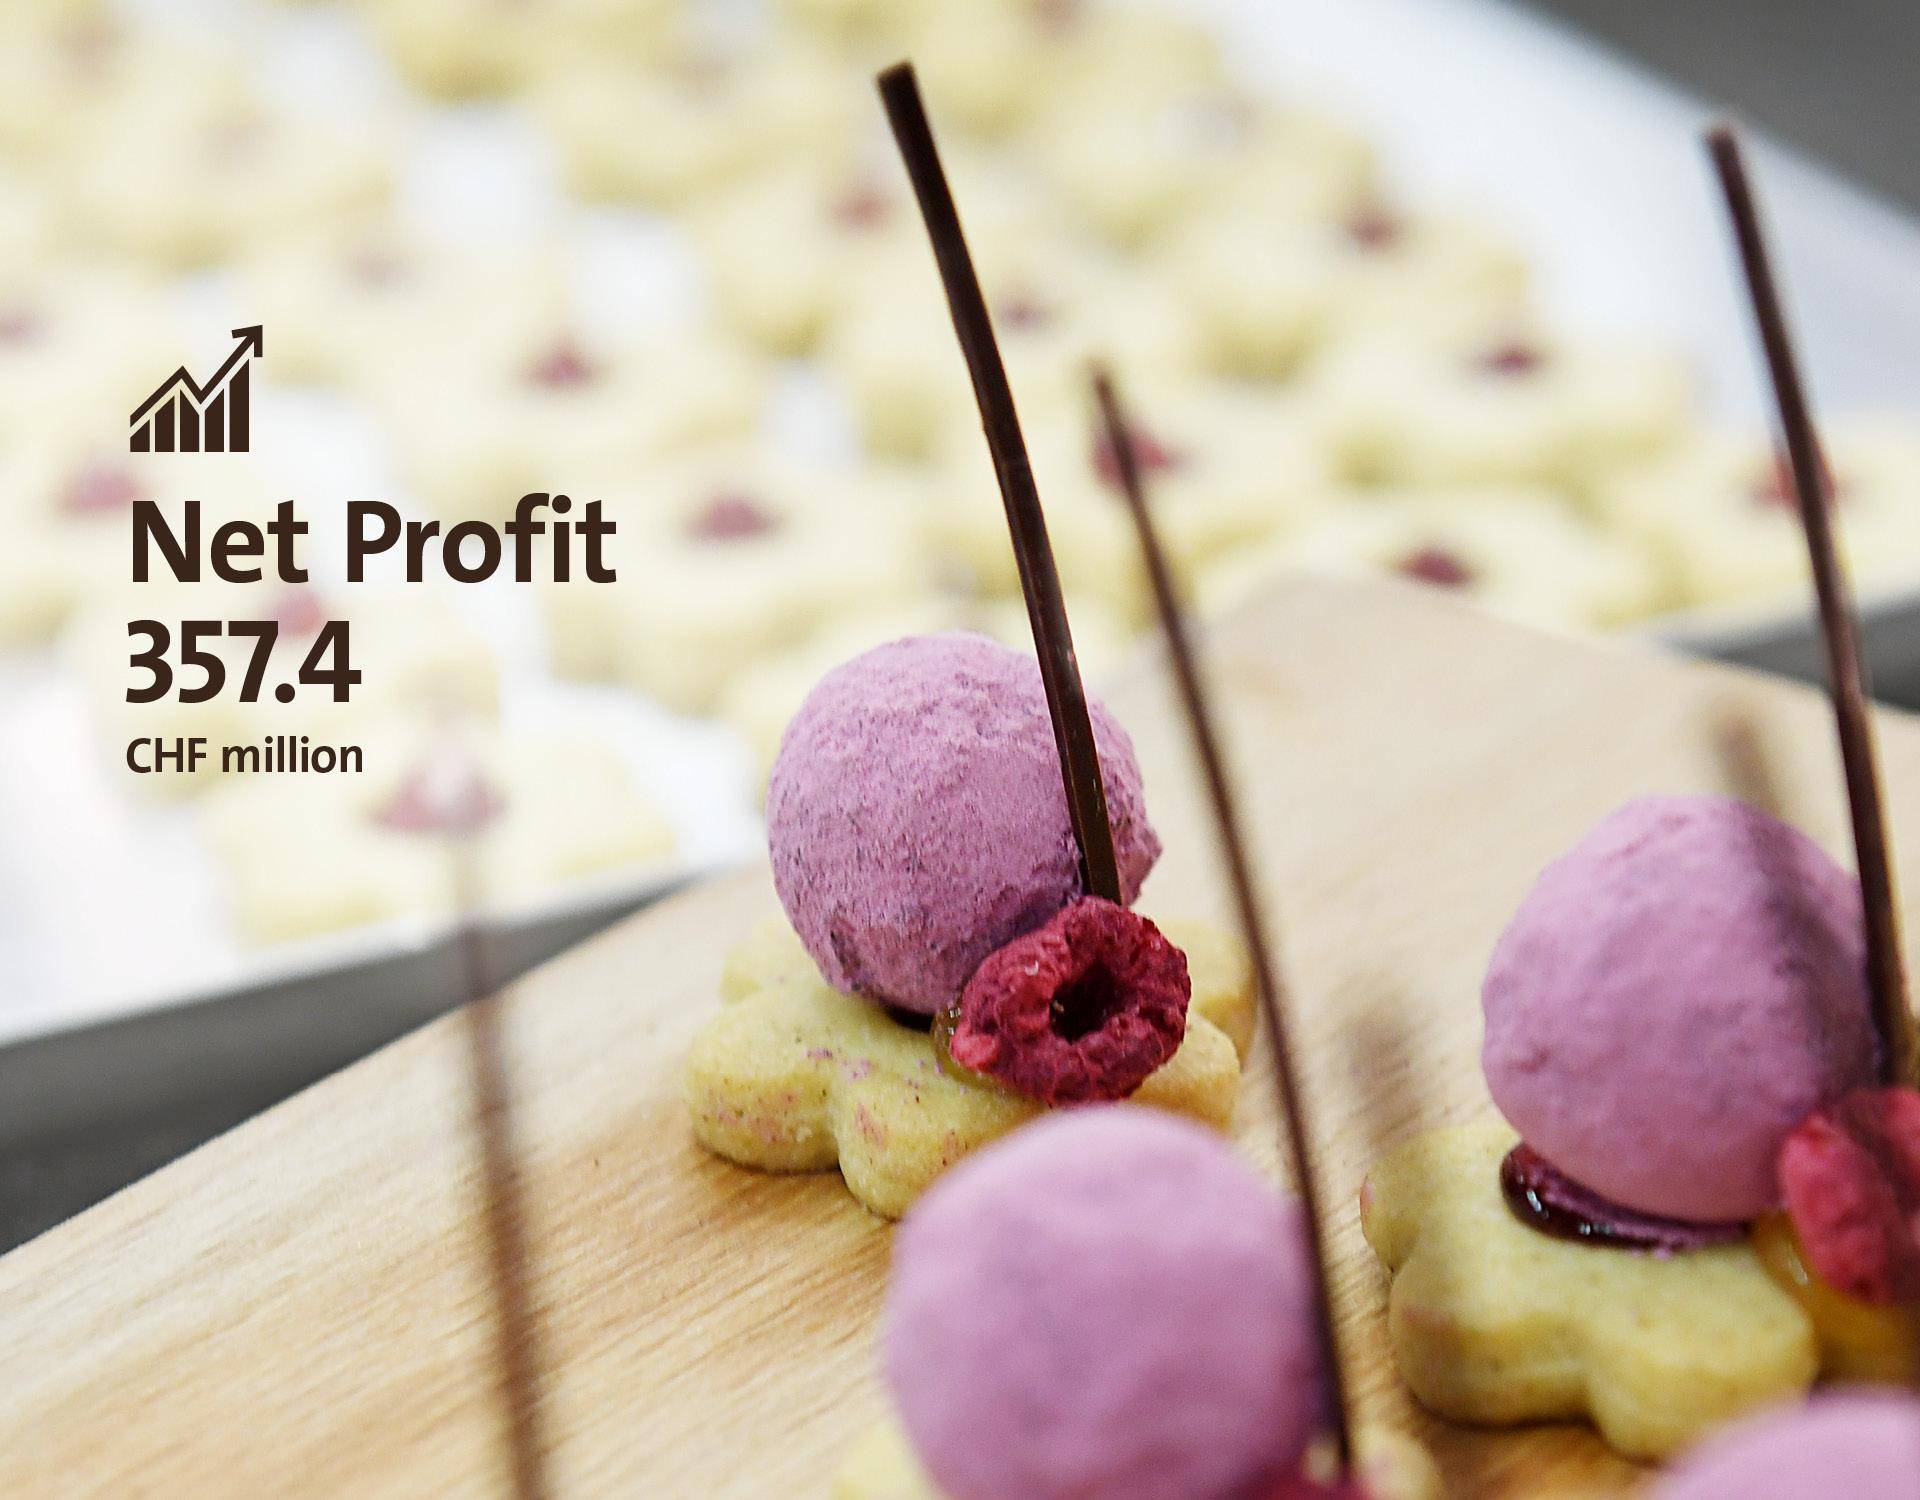 Image Slider Net Profit Fiscal Year 2017/18 Barry Callebaut Group